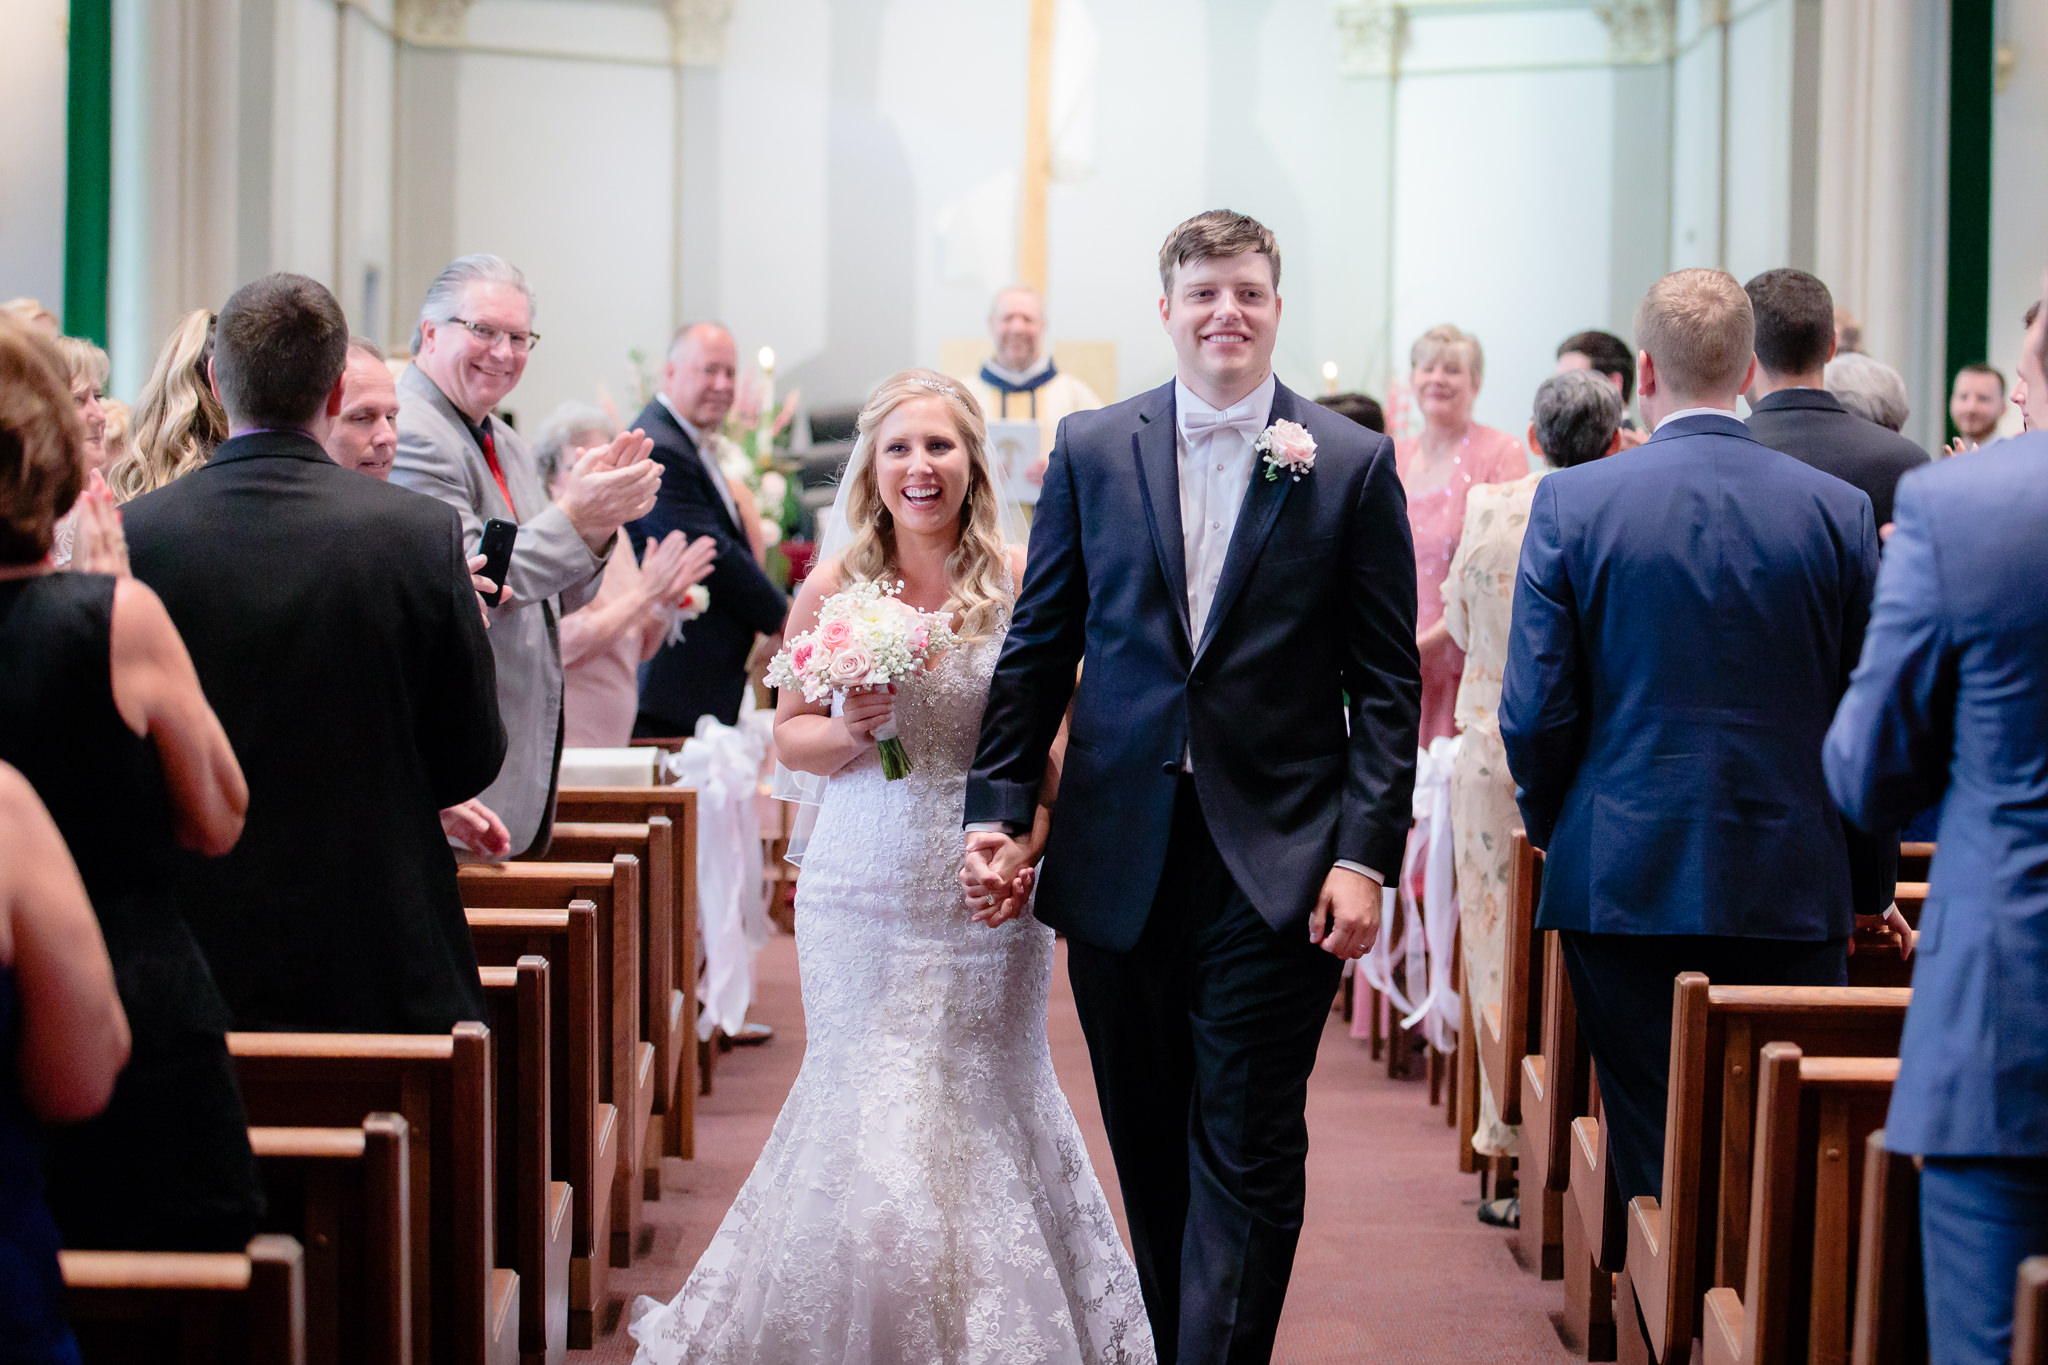 Newlyweds exit their wedding ceremony at Duquesne University